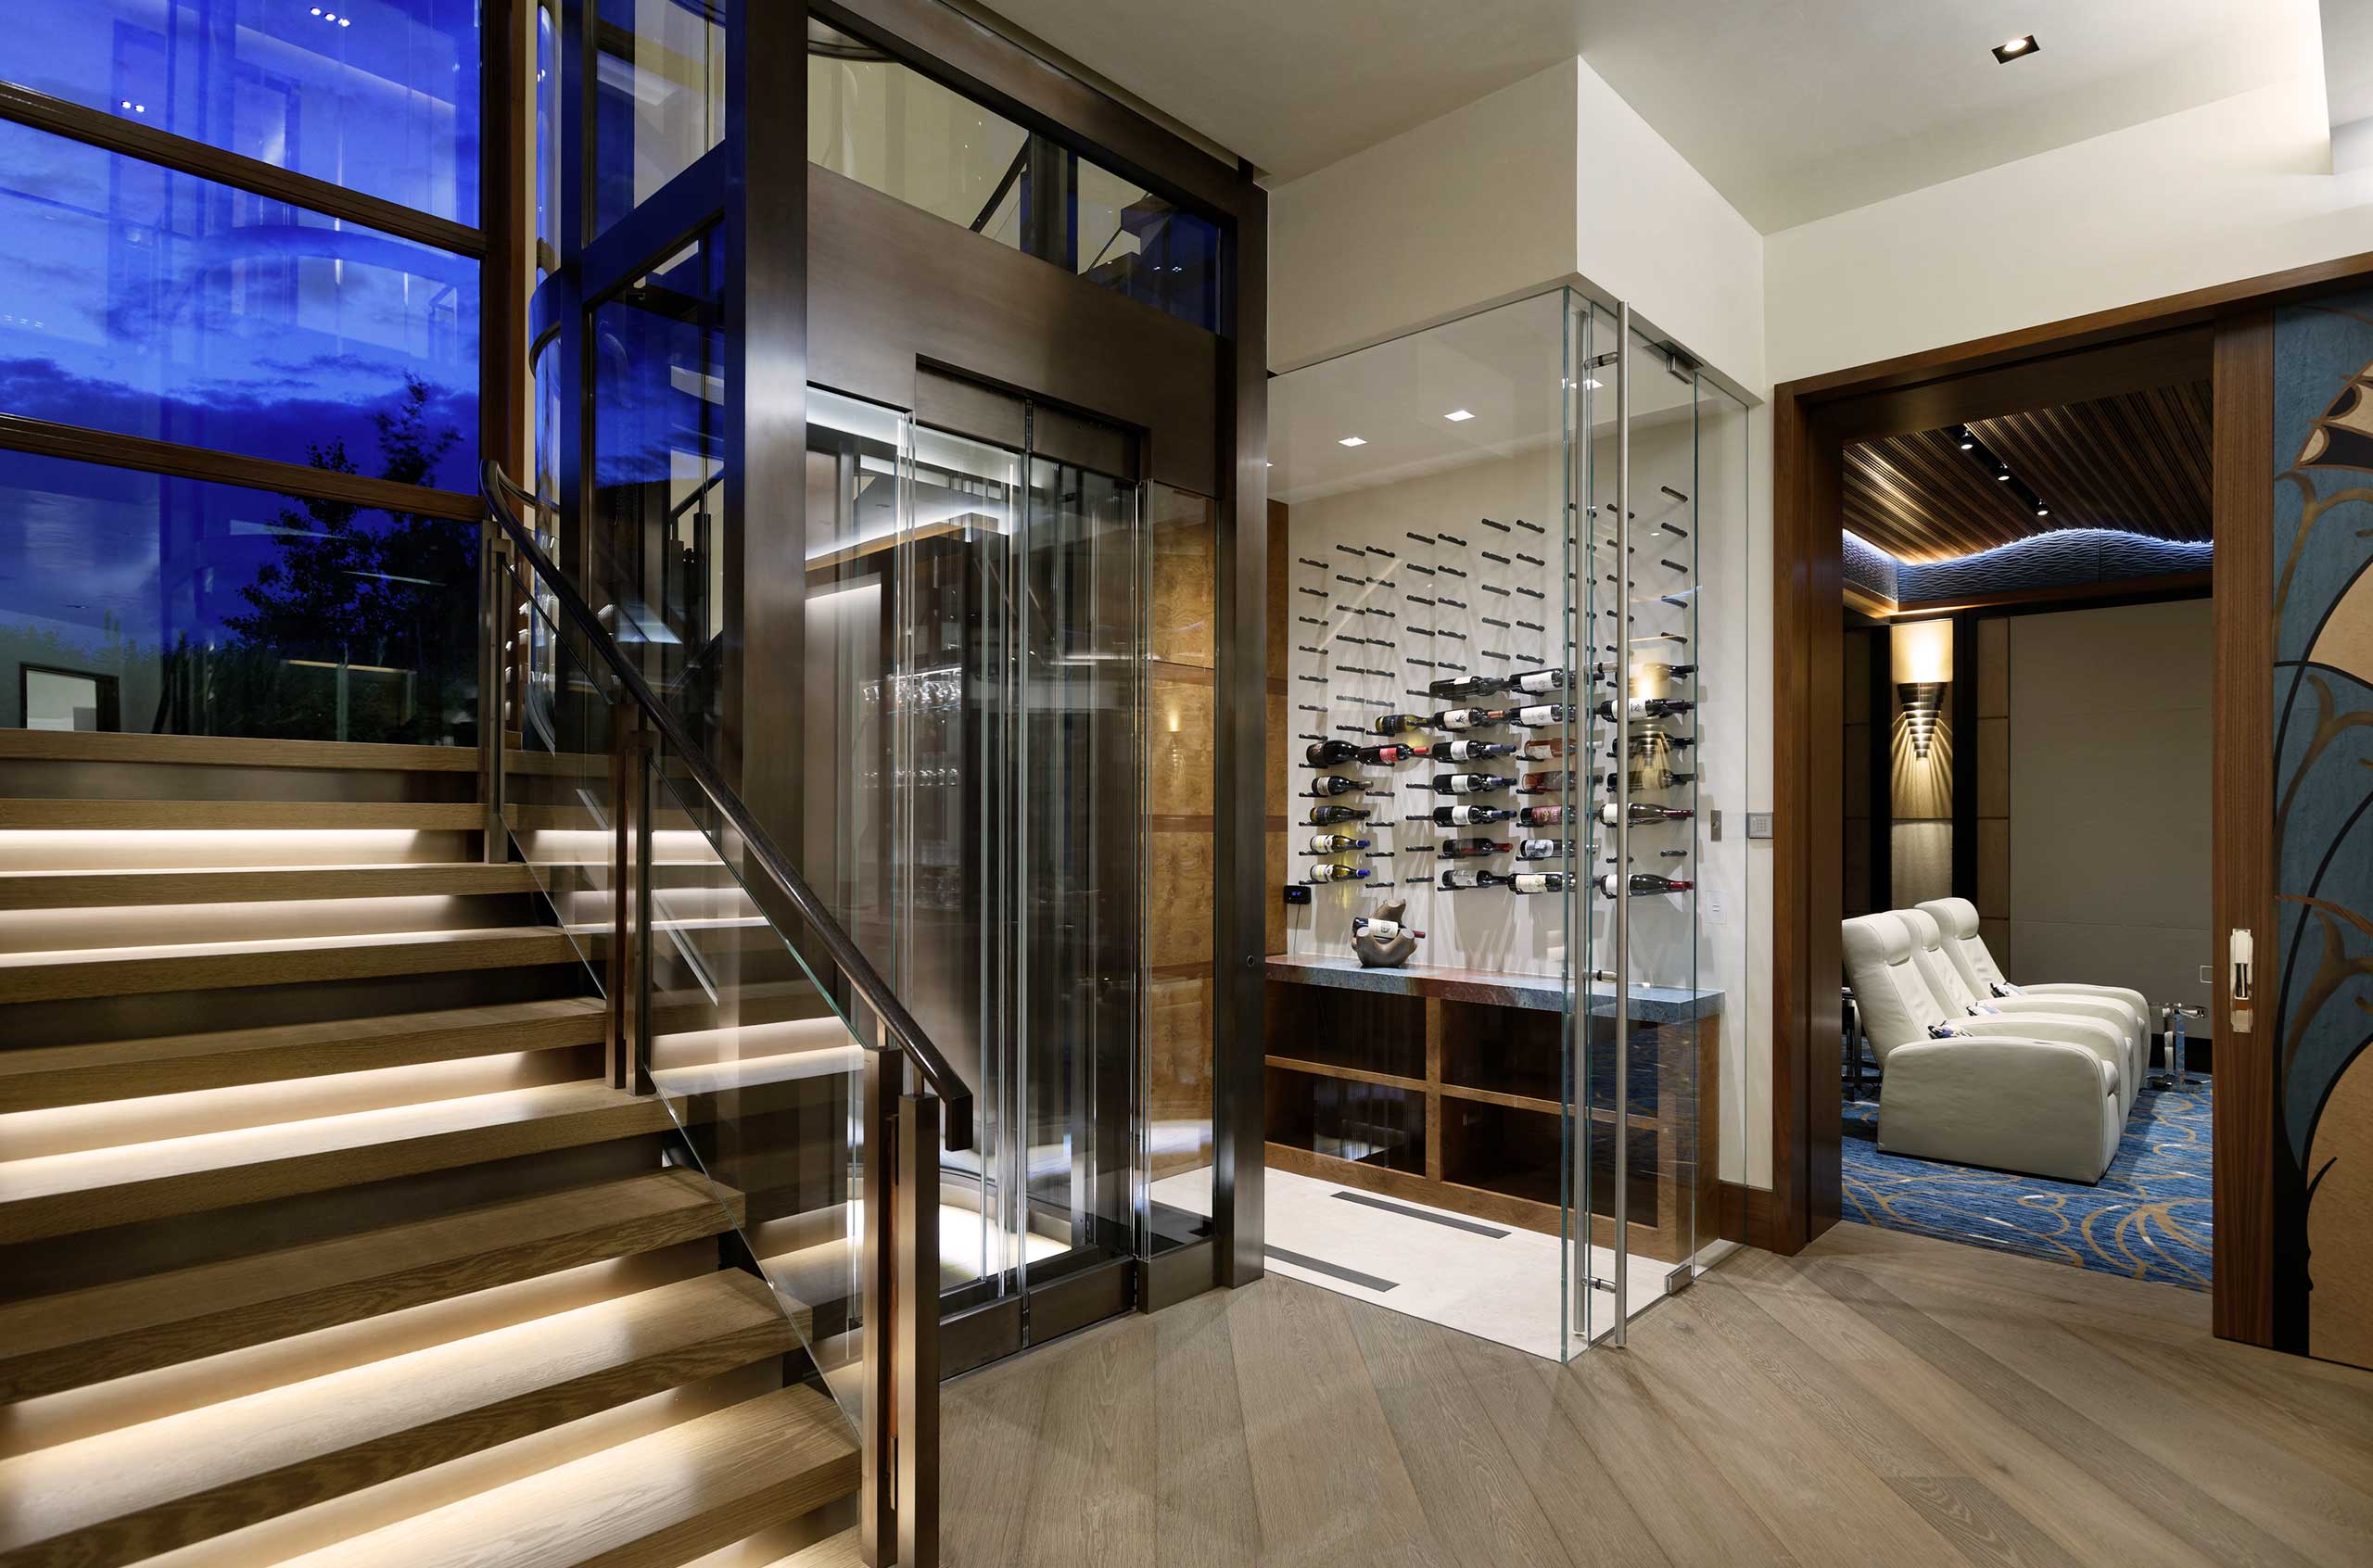 Spacious entryway of an Aspen Cuvée luxury villa with oversized glass windows, sweeping mountain views and custom luxury interior design.